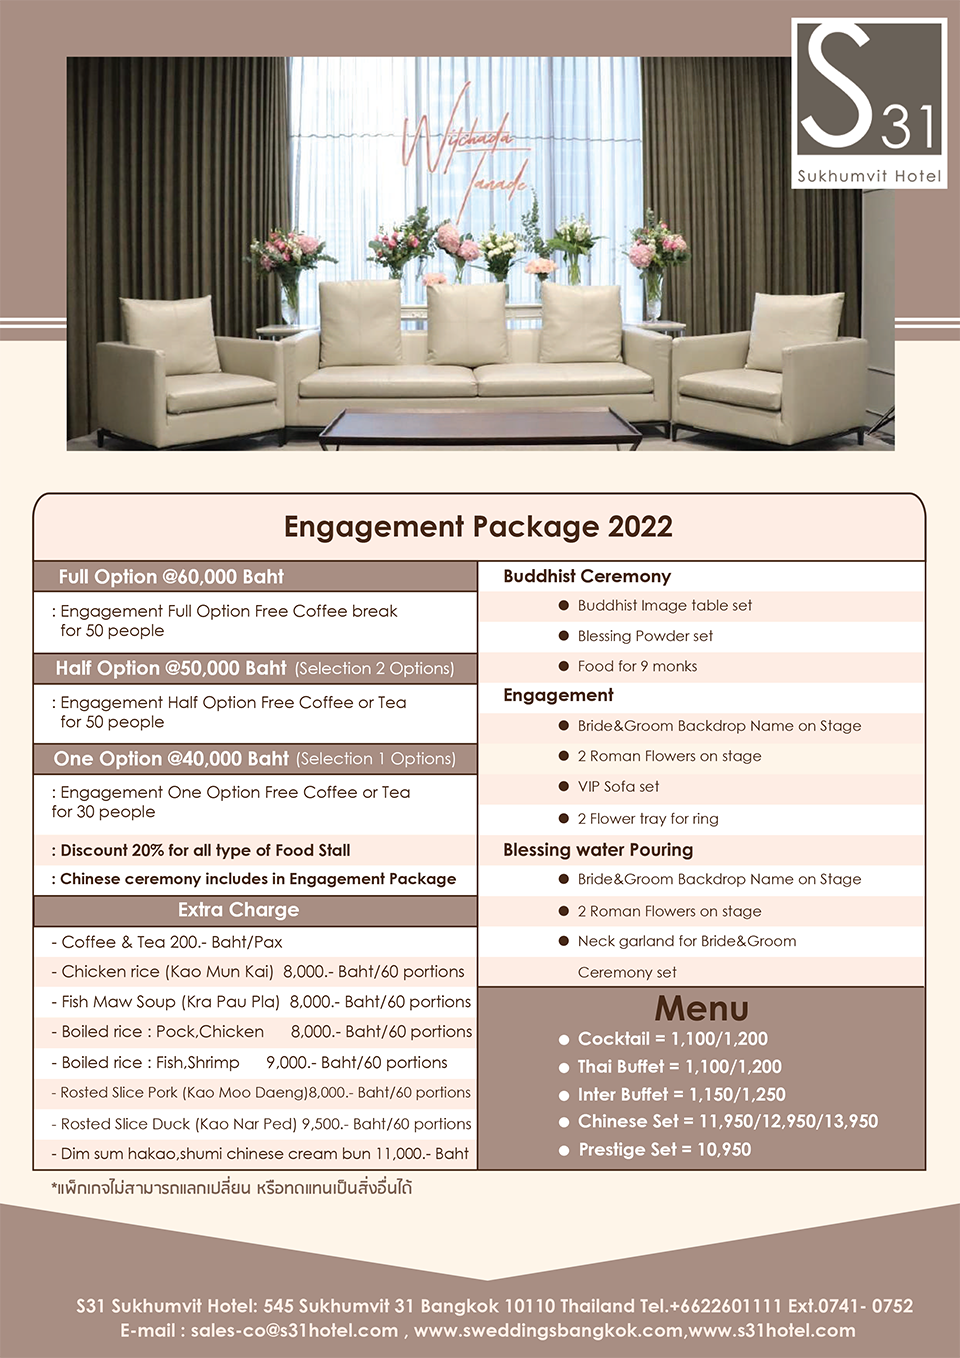 Engagement Package 2022